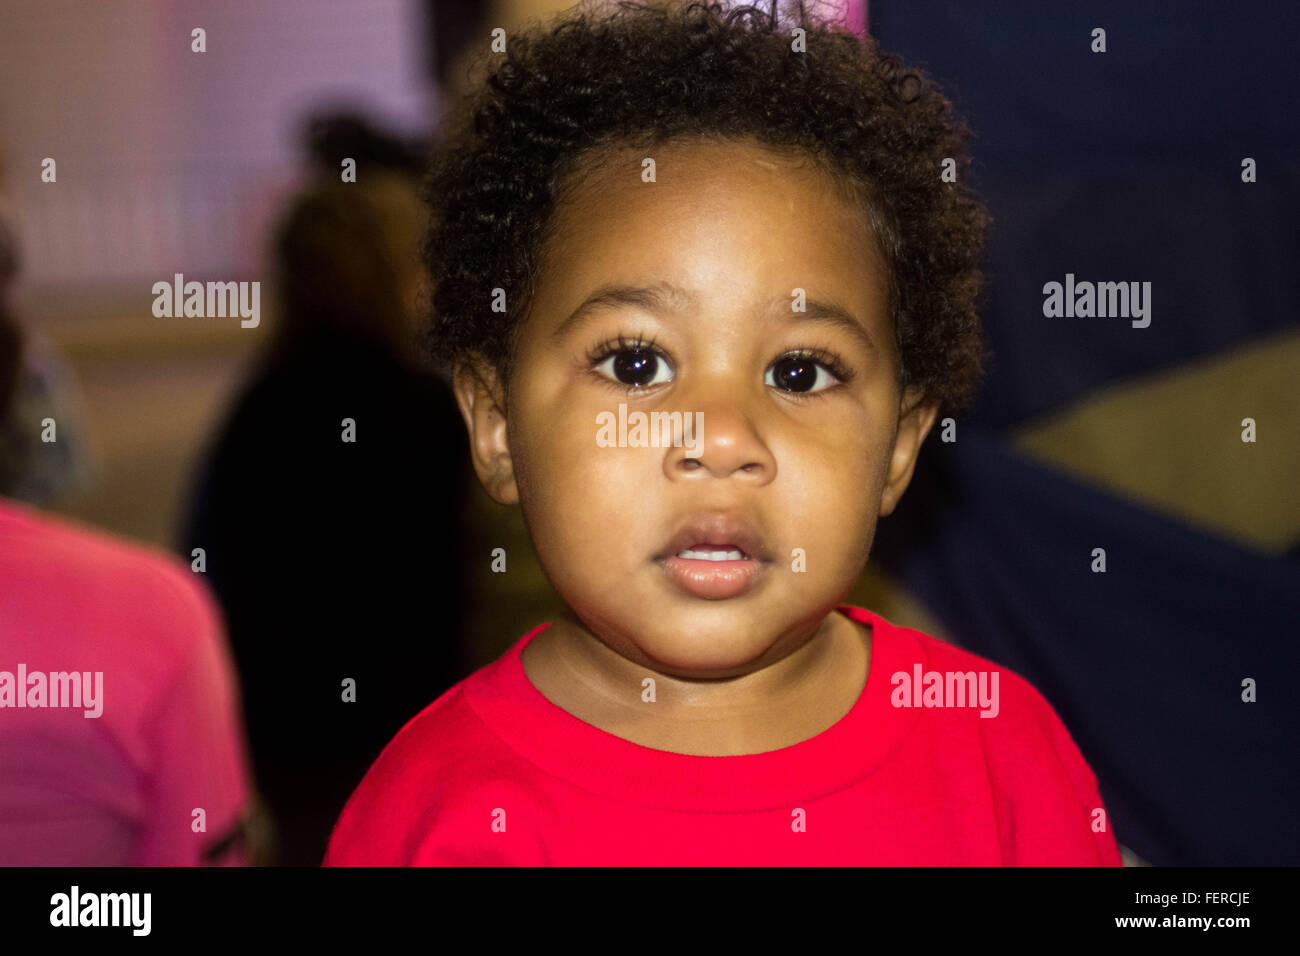 A little boy in red shirt at a park Stock Photo